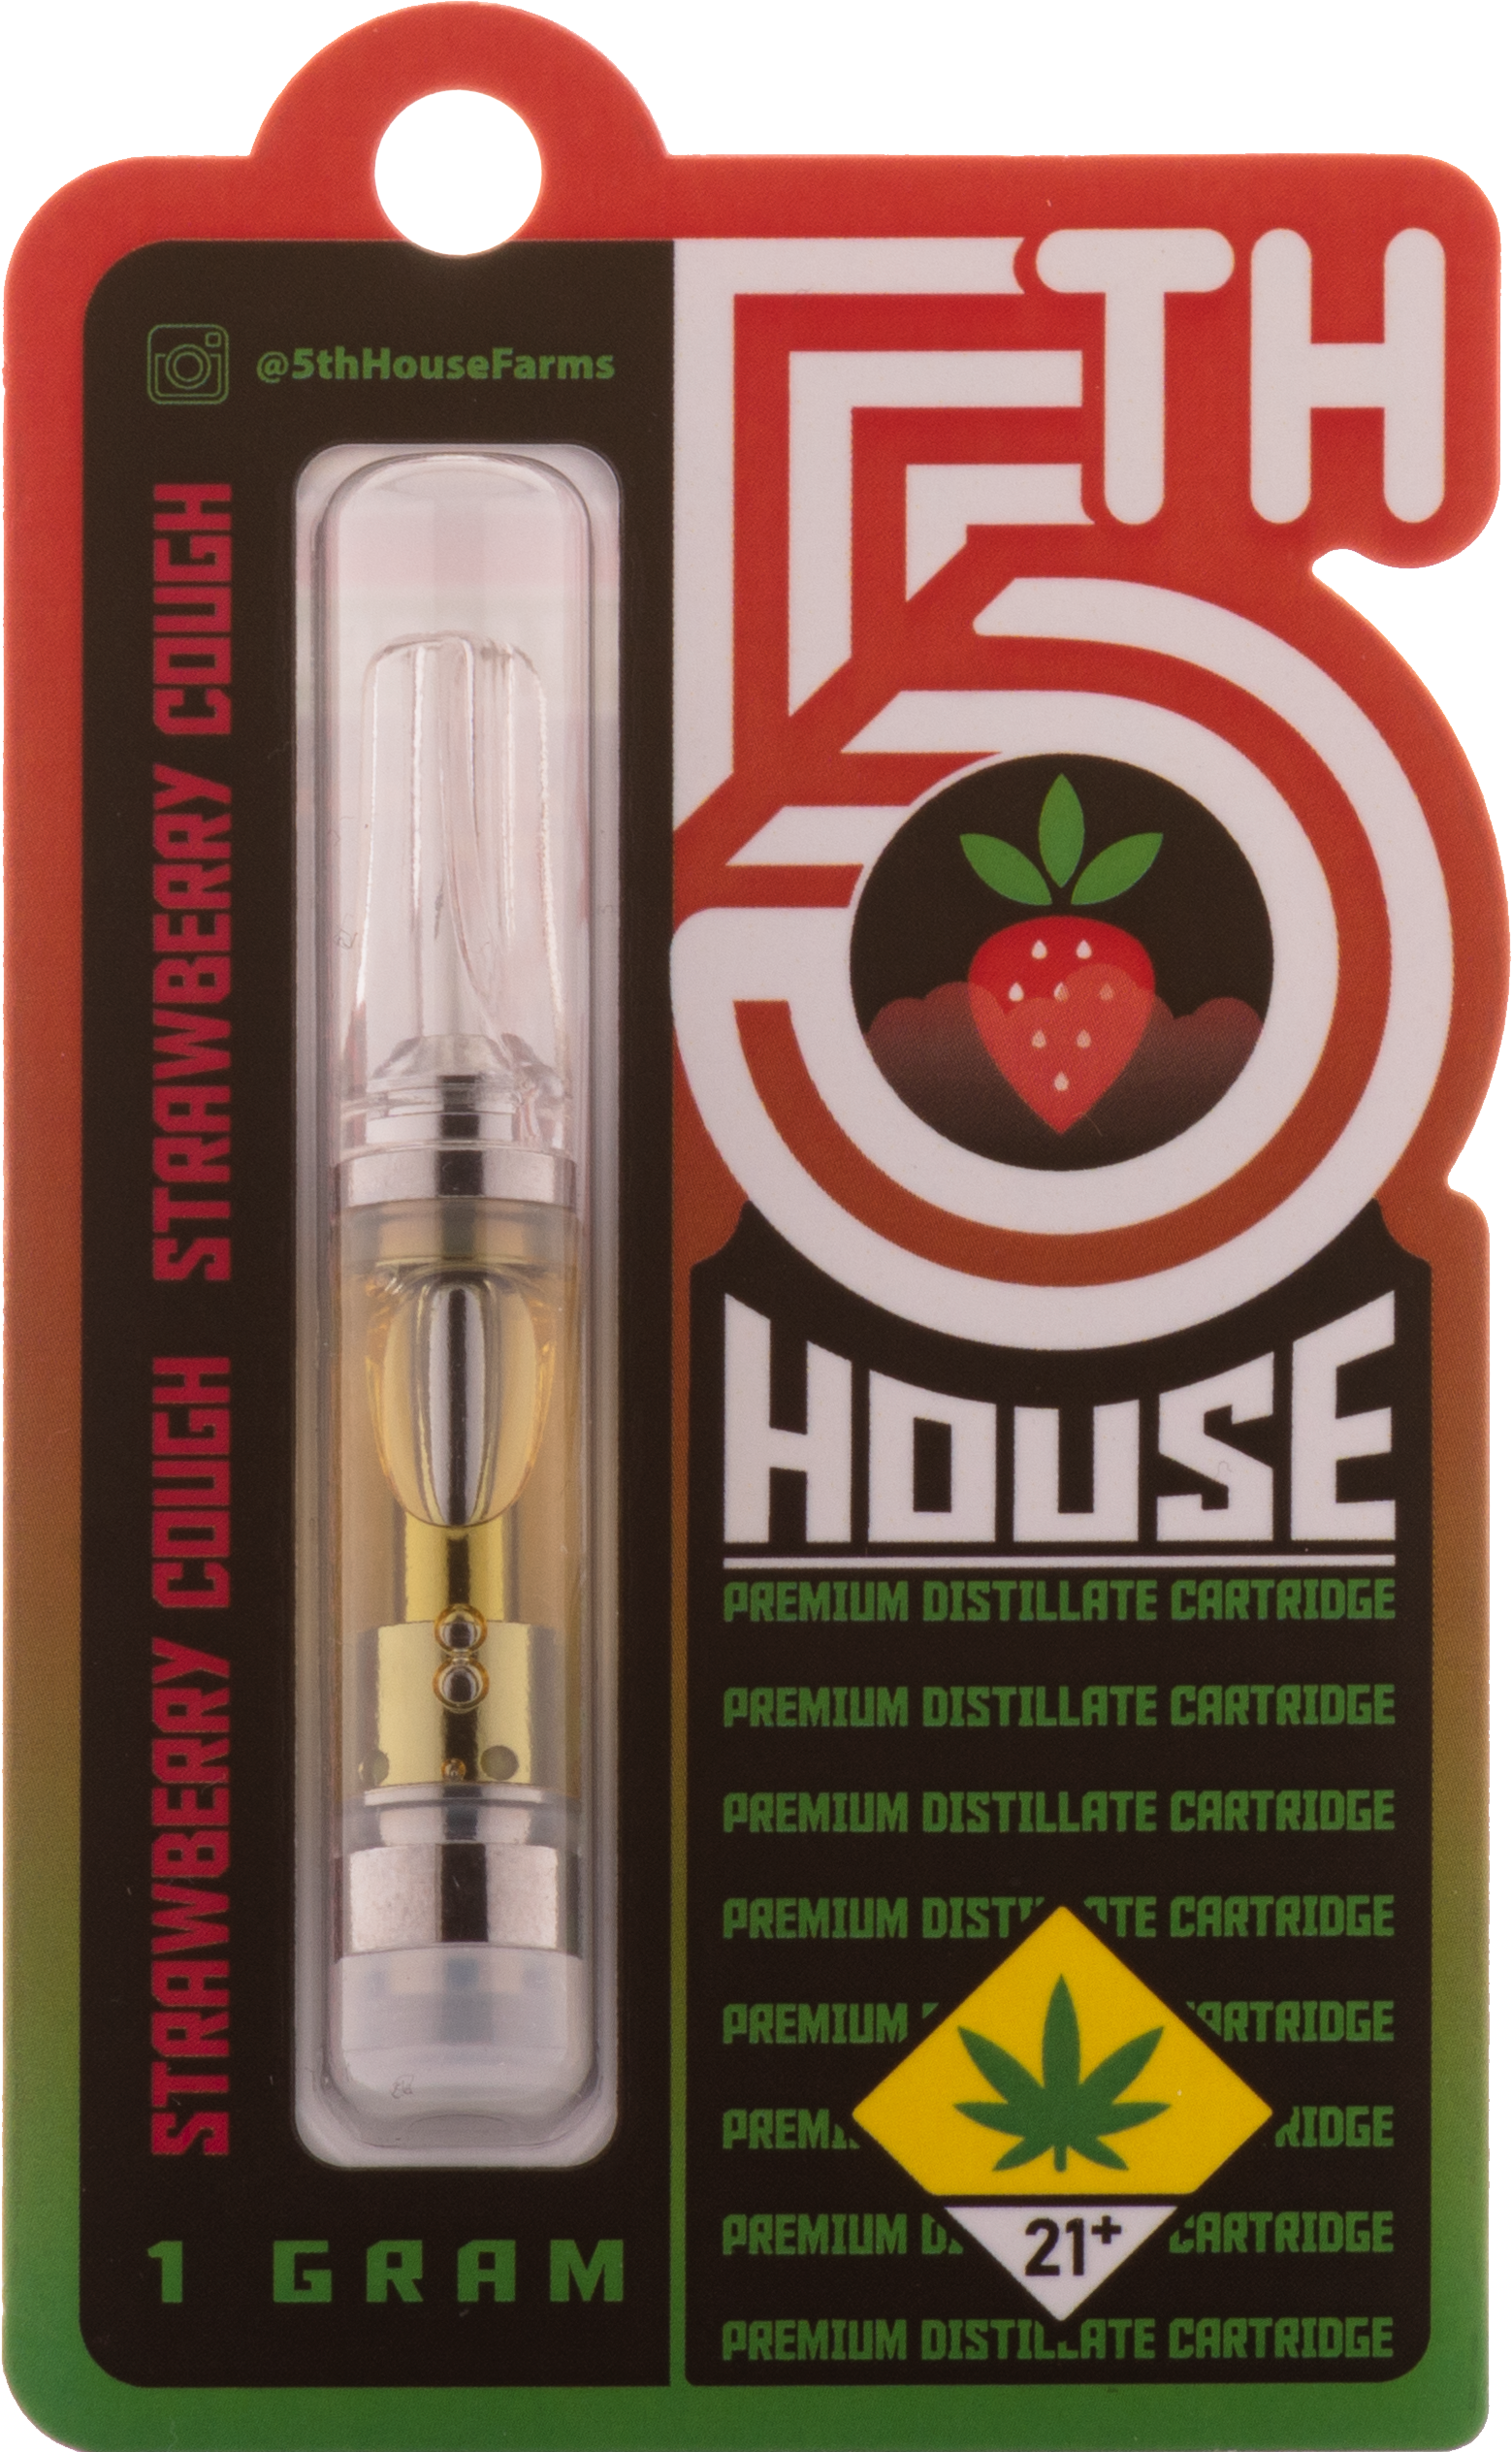 5th House Strawberry Cough